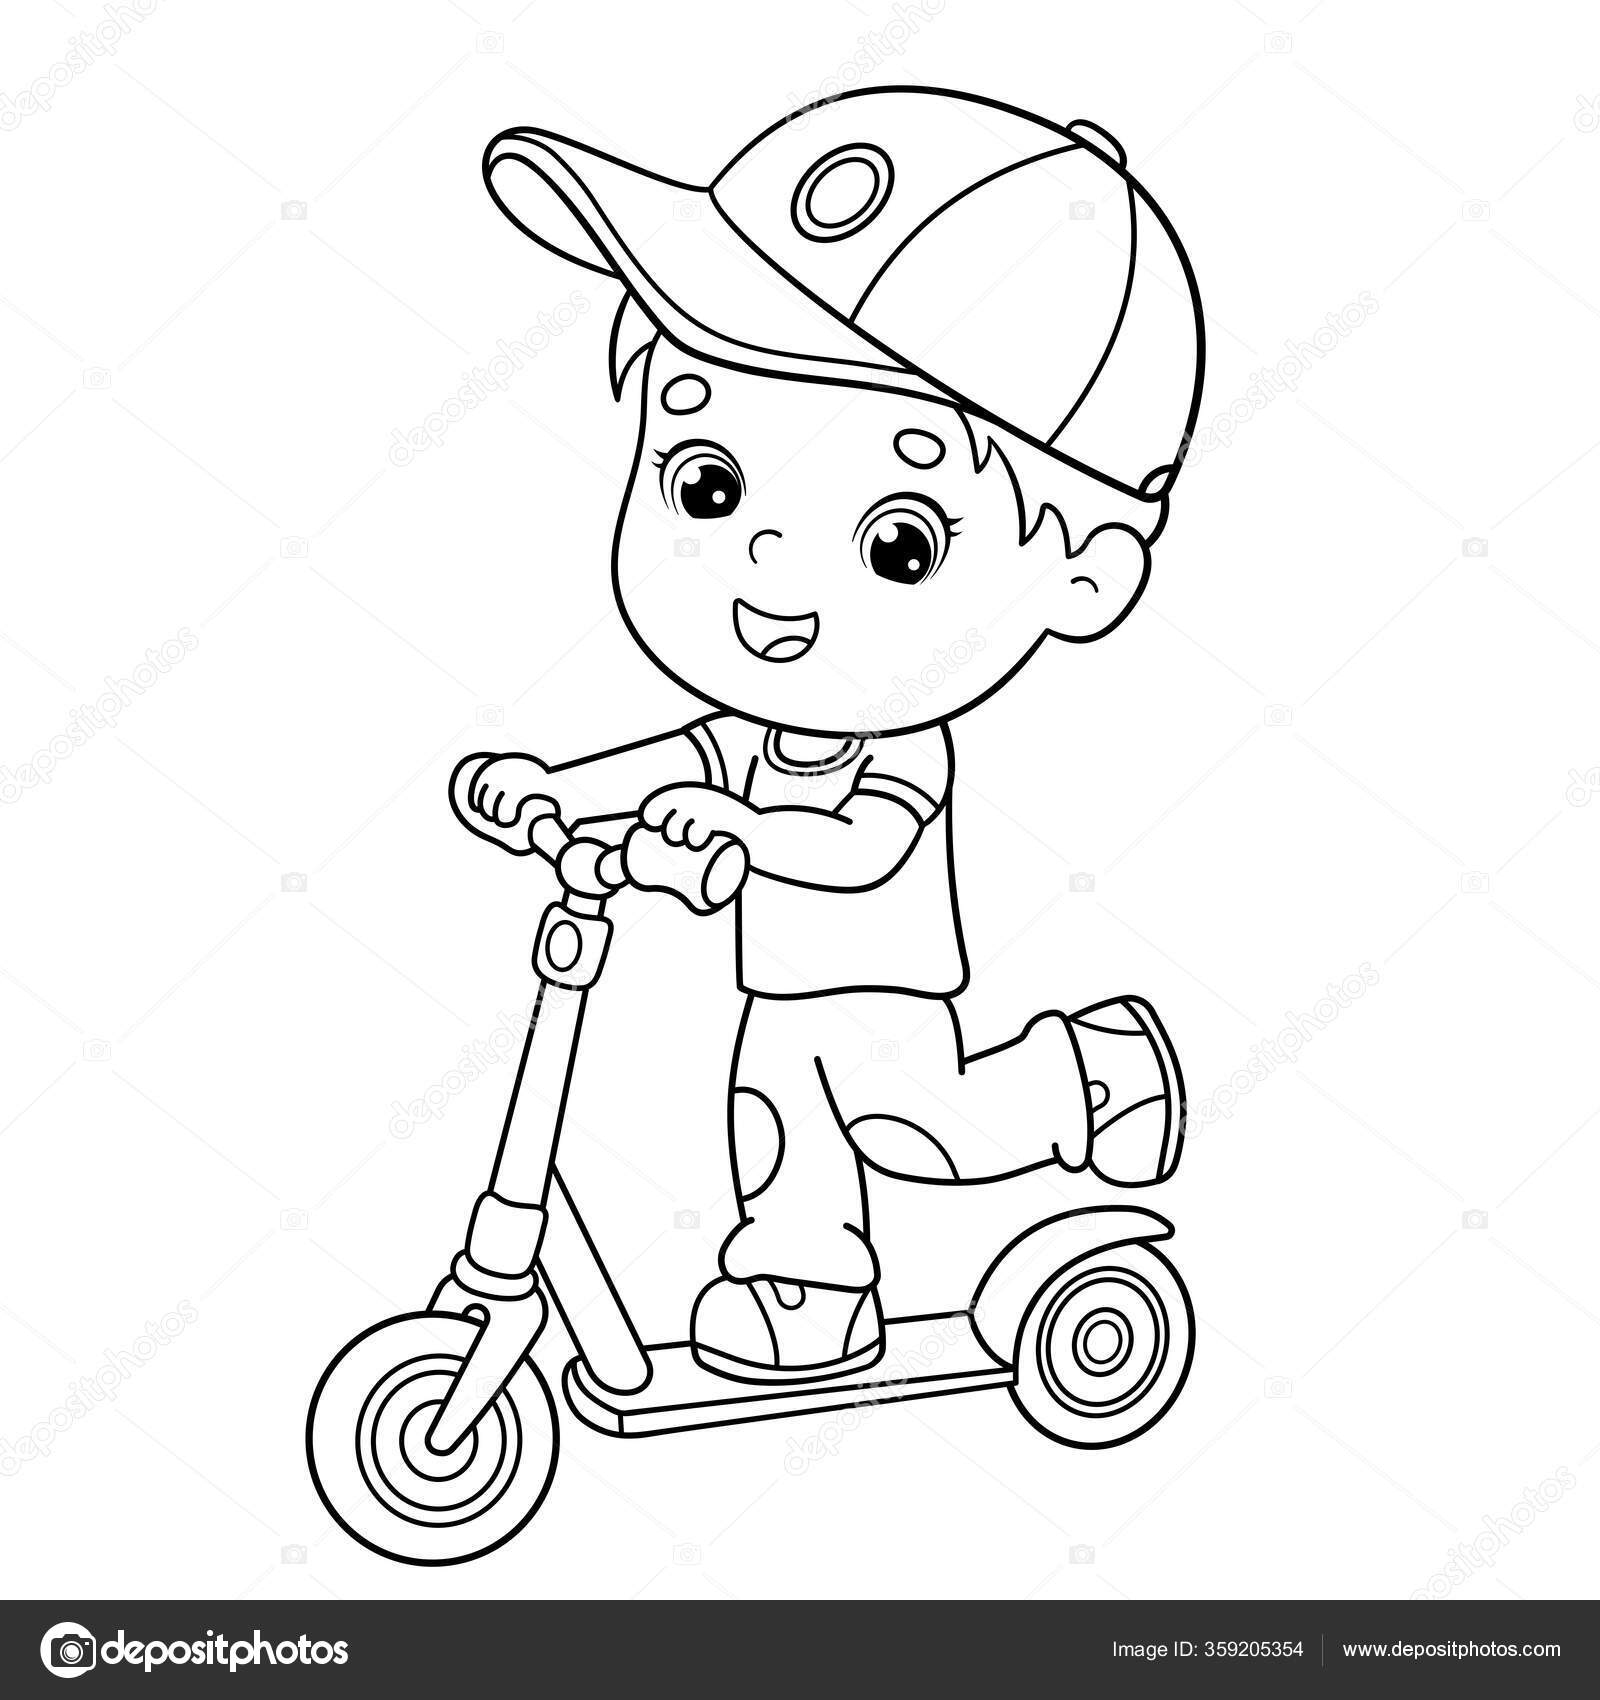 Coloring page outline cartoon boy scooter coloring book kids stock vector by oleon